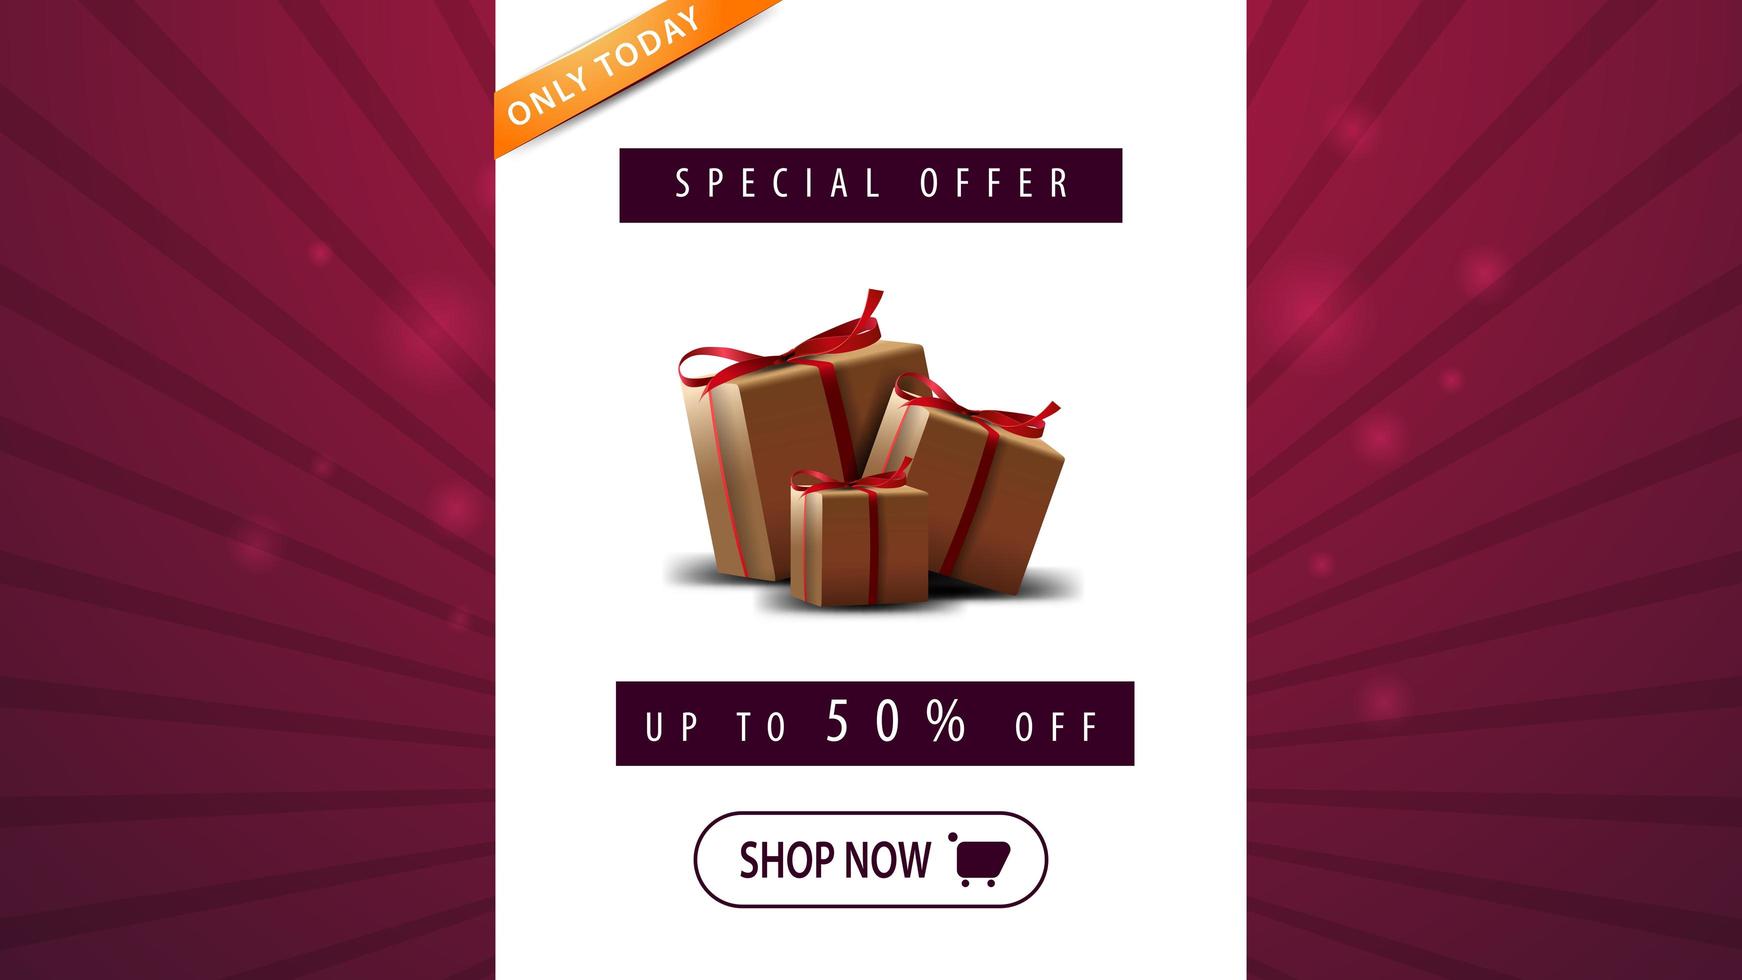 Only today, special offer, sale up to 50 off, horizontal discount banner with gift boxes vector